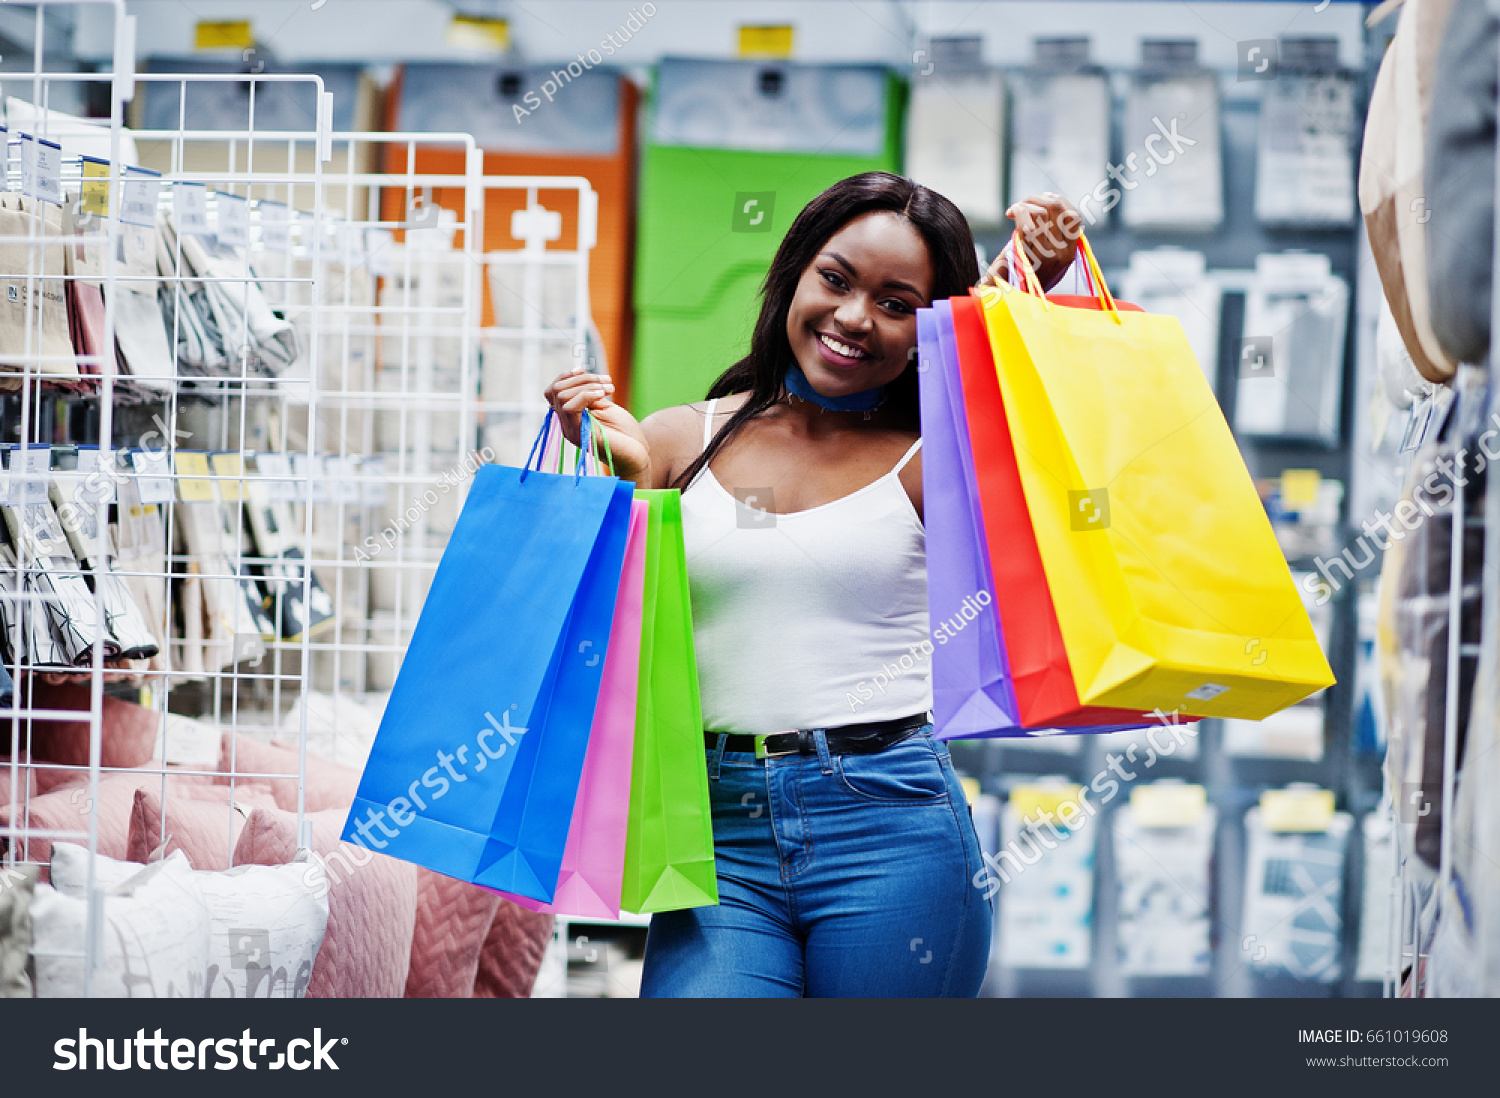 6,778 Black lady carrying shopping bags Images, Stock Photos & Vectors ...